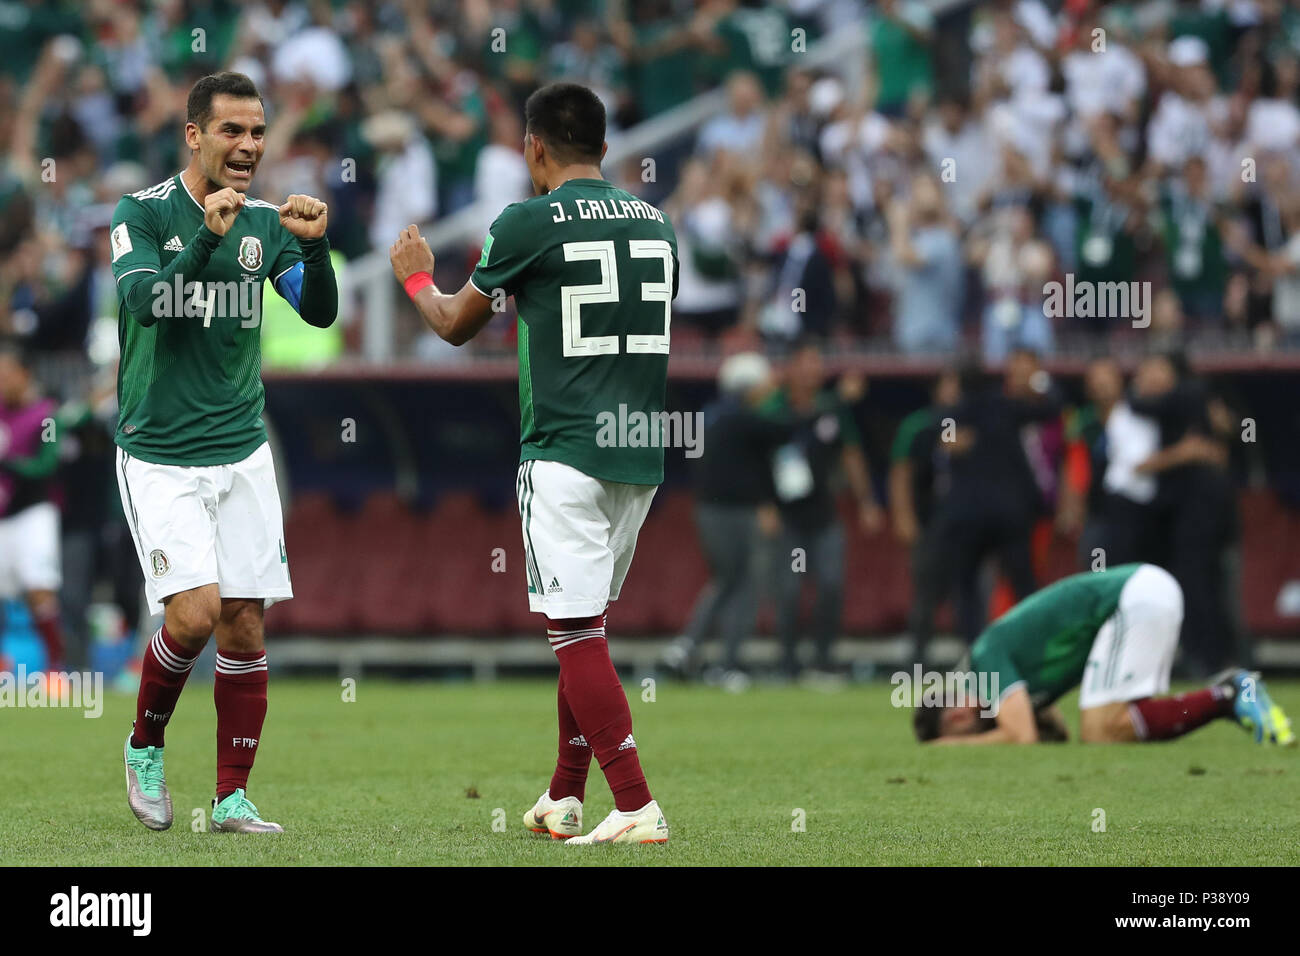 Moscow, Russia, 17 June 2018.Rafael Marquez and Jesus Gallardo celebrate the victory at the end of the match between Germany and Mexico valid for the 2018 World Cup held at the Lujniki Stadium in Moscow, Russia. (Photo: Ricardo Moreira/Fotoarena) Credit: Foto Arena LTDA/Alamy Live News Stock Photo